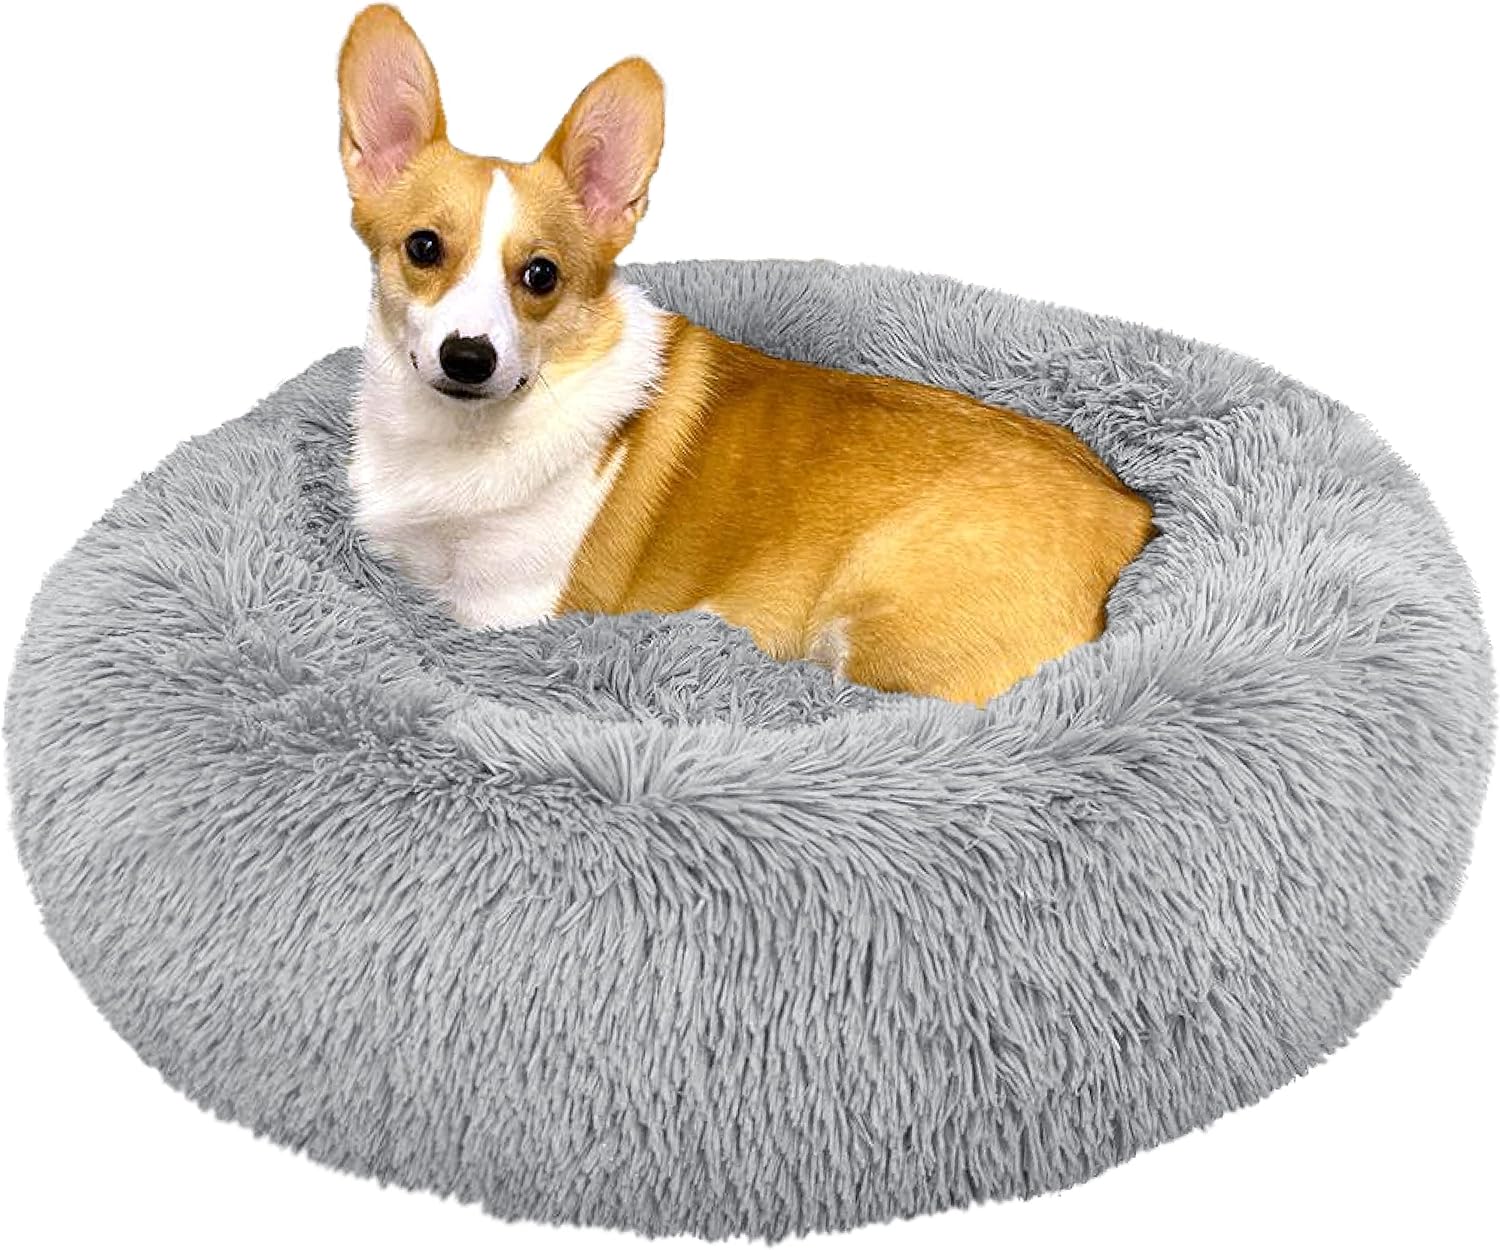 PetAmi Medium Calming Dog Bed for Dogs Puppy, Round Washable Pet Bed for Cat Kitten, Anti Anxiety Dog Bed Cuddler for Couch, Fluffy Plush Circular Dog Donut Bed, Fits up to 45 lbs, 30 inch, Light Gray